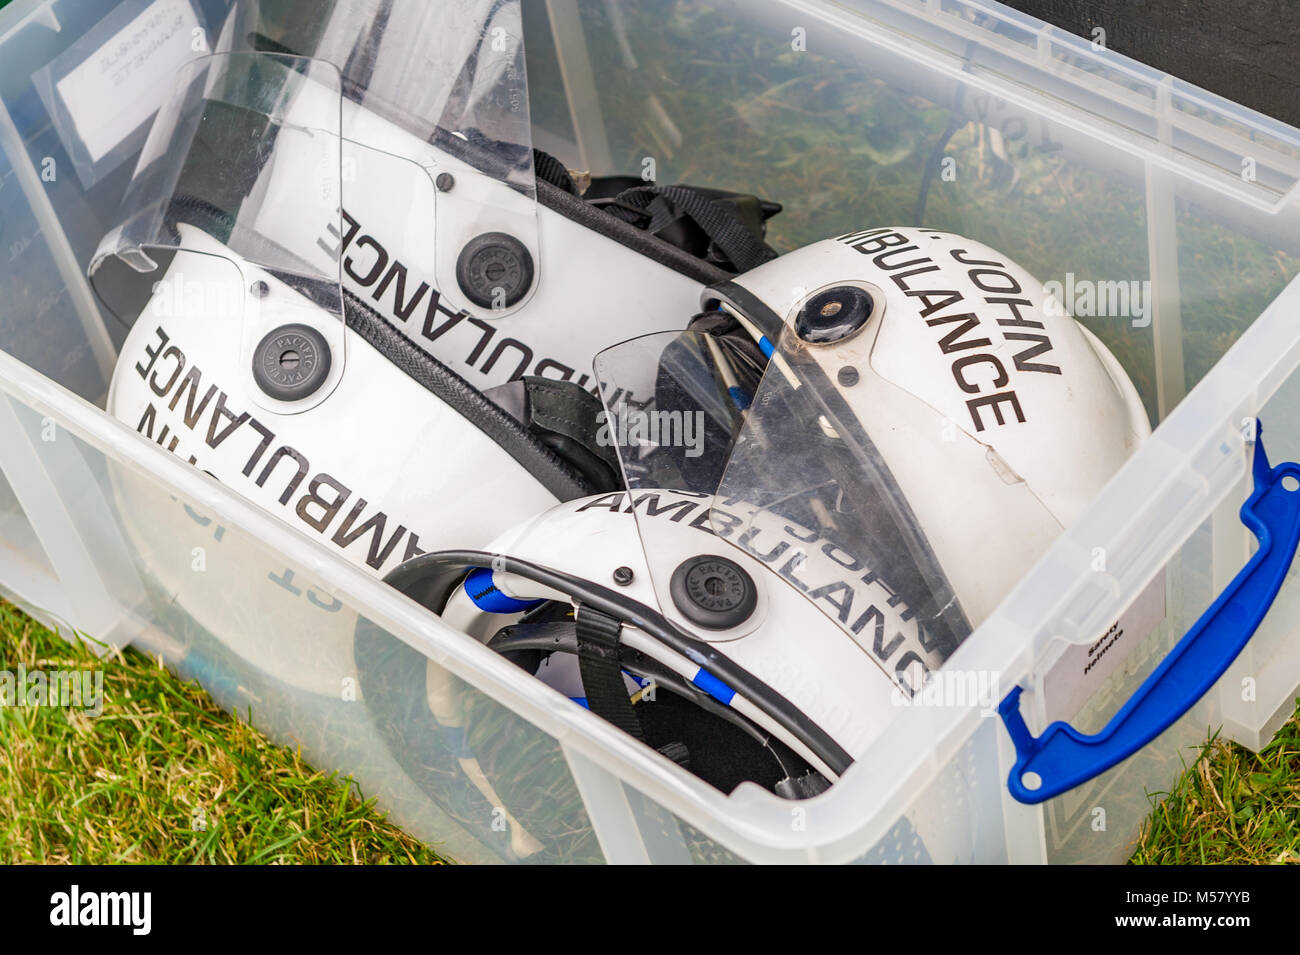 St John Ambulance helmets in a box at a live music festival in Coventry, UK. Stock Photo